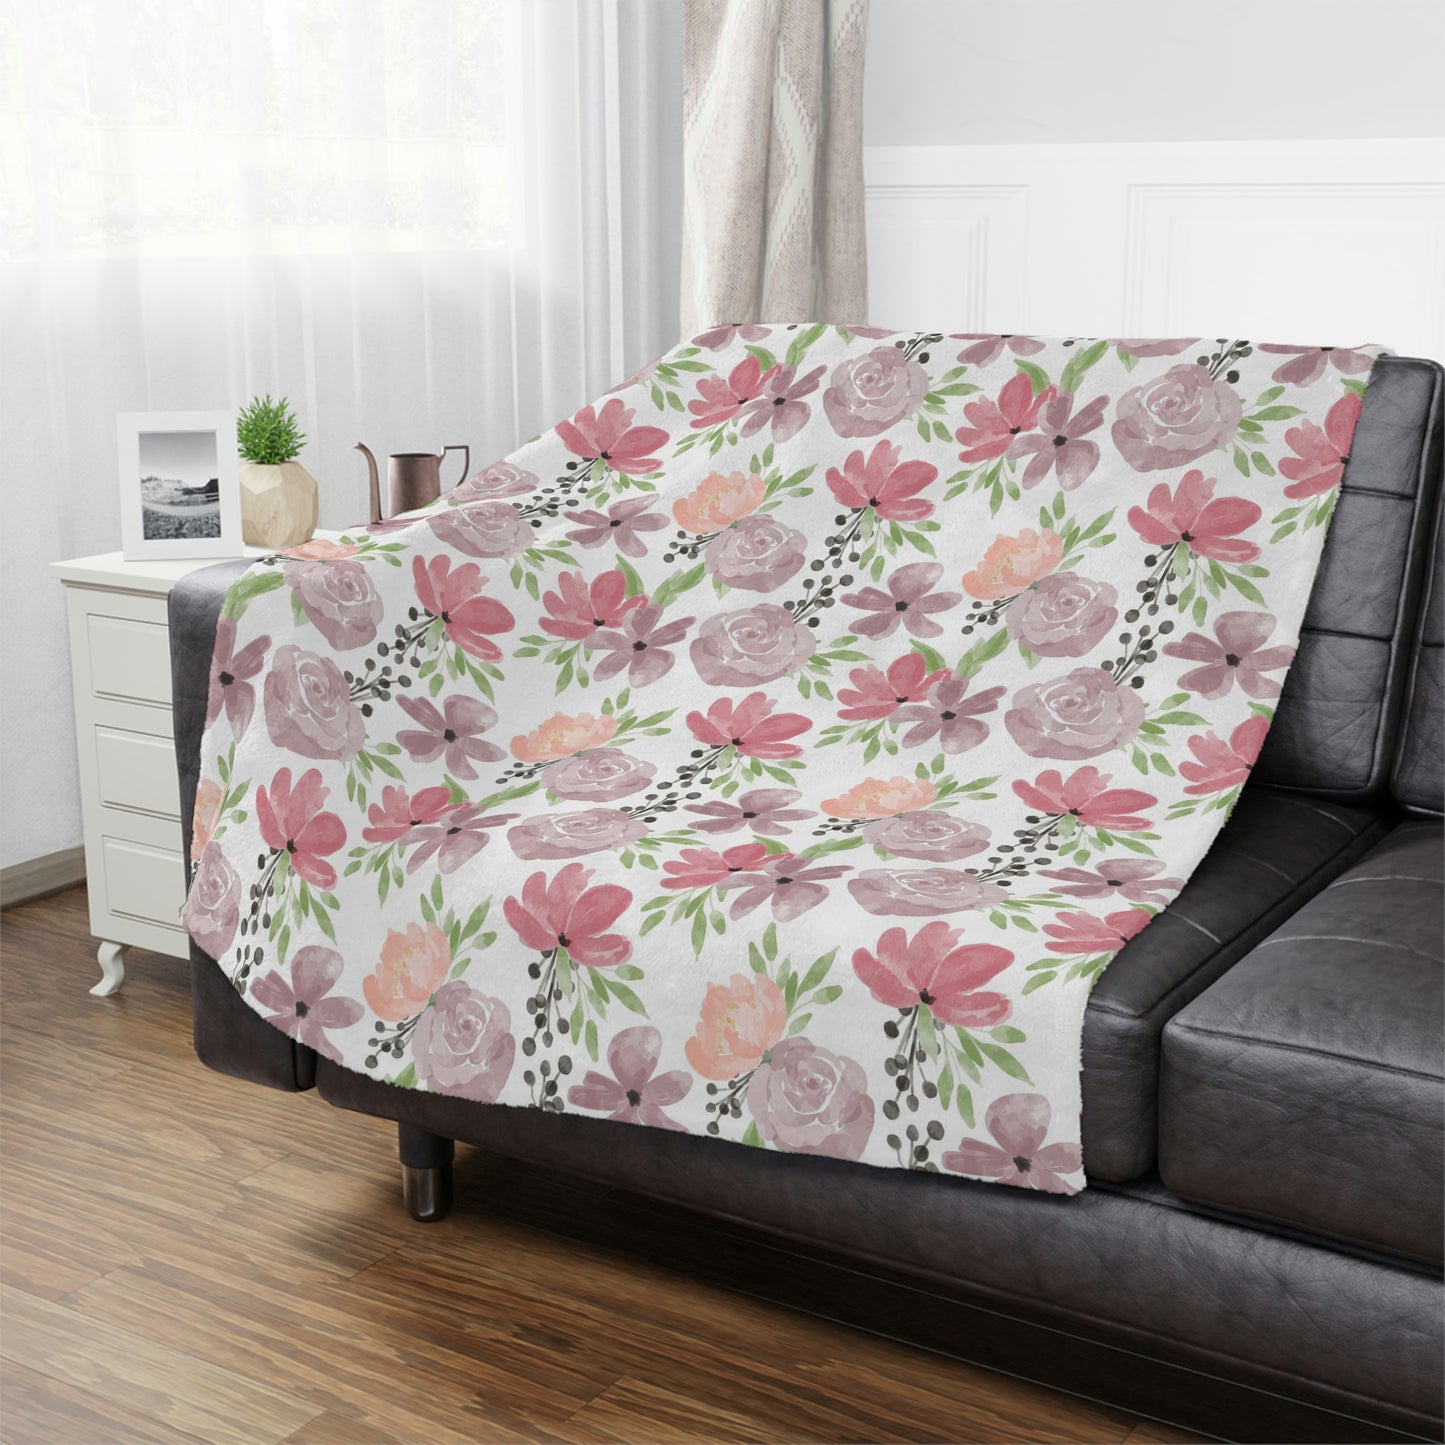 pink and purple floral blanket on a couch, pink flower pattern on a blanket, purple floral throw blanket lying on a bed